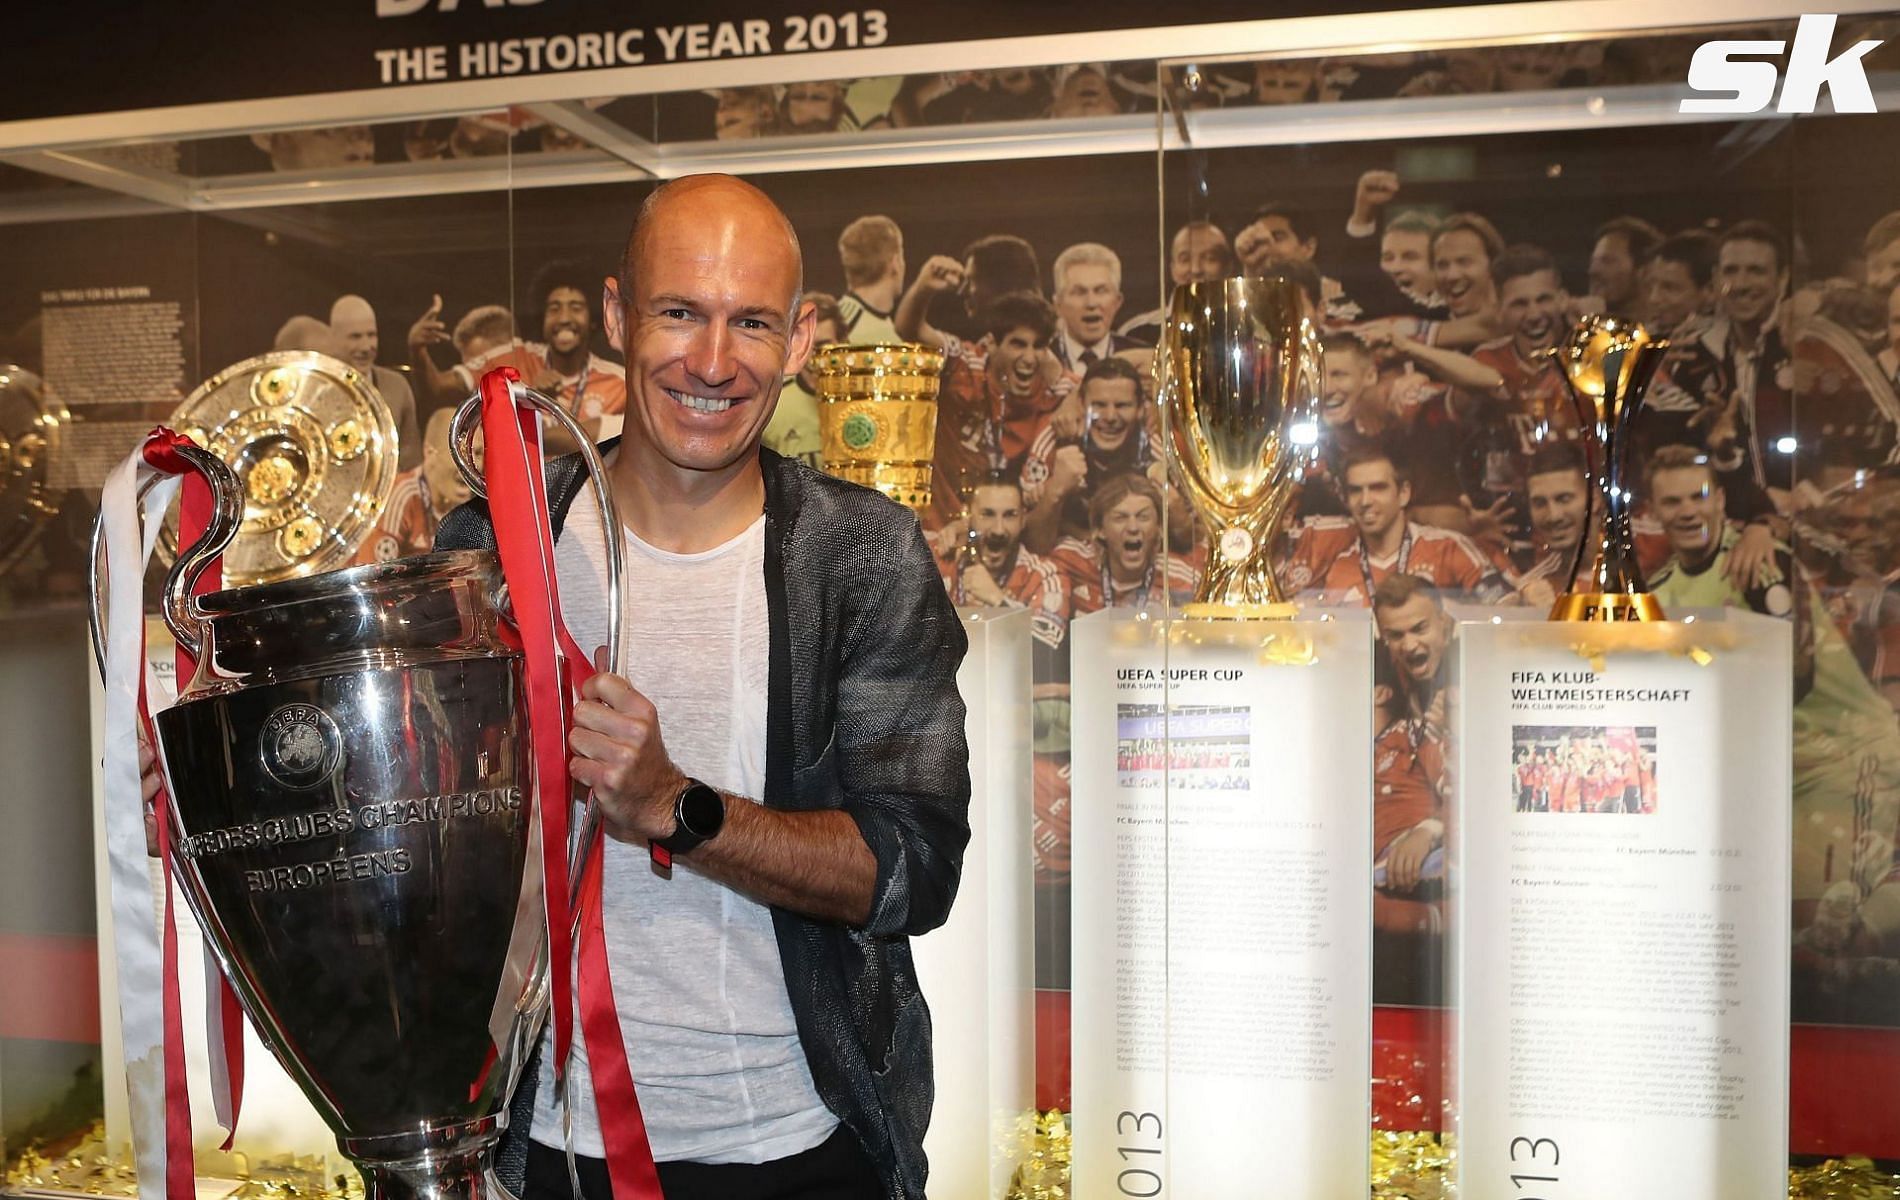 Bayern Munich's 2012/13 treble winners: Where are they now?